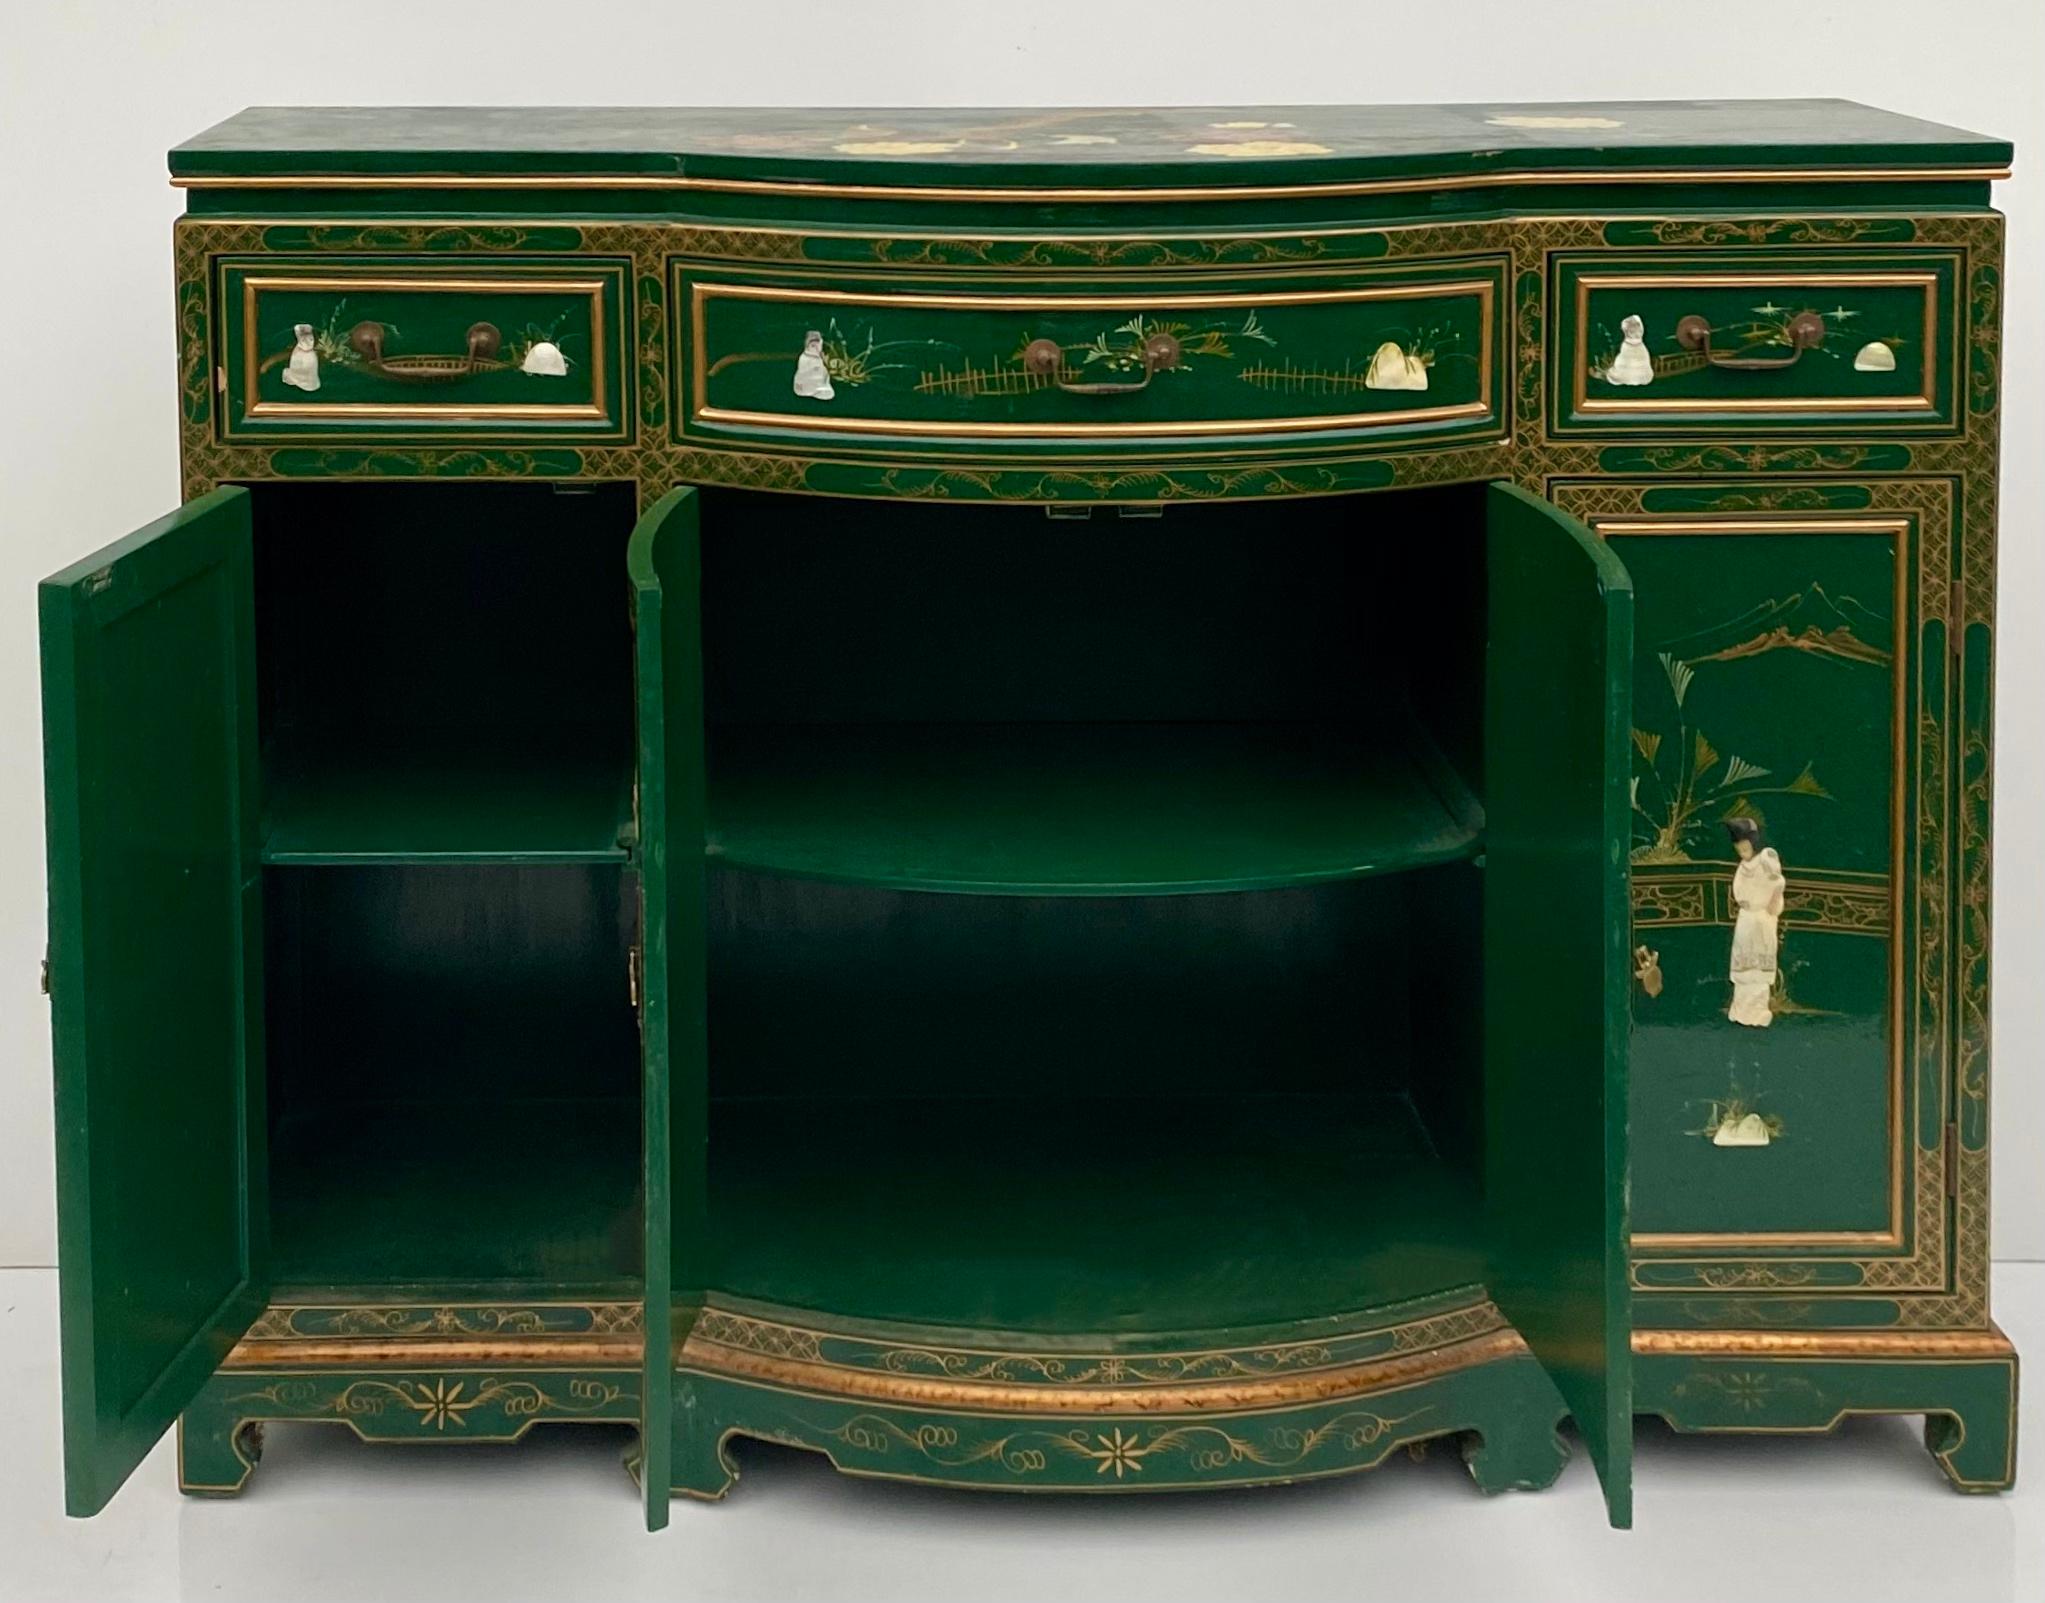 Wood Late 20th C. Green Lacquered Chinoiserie Chippendale Style Sideboard / Credenza